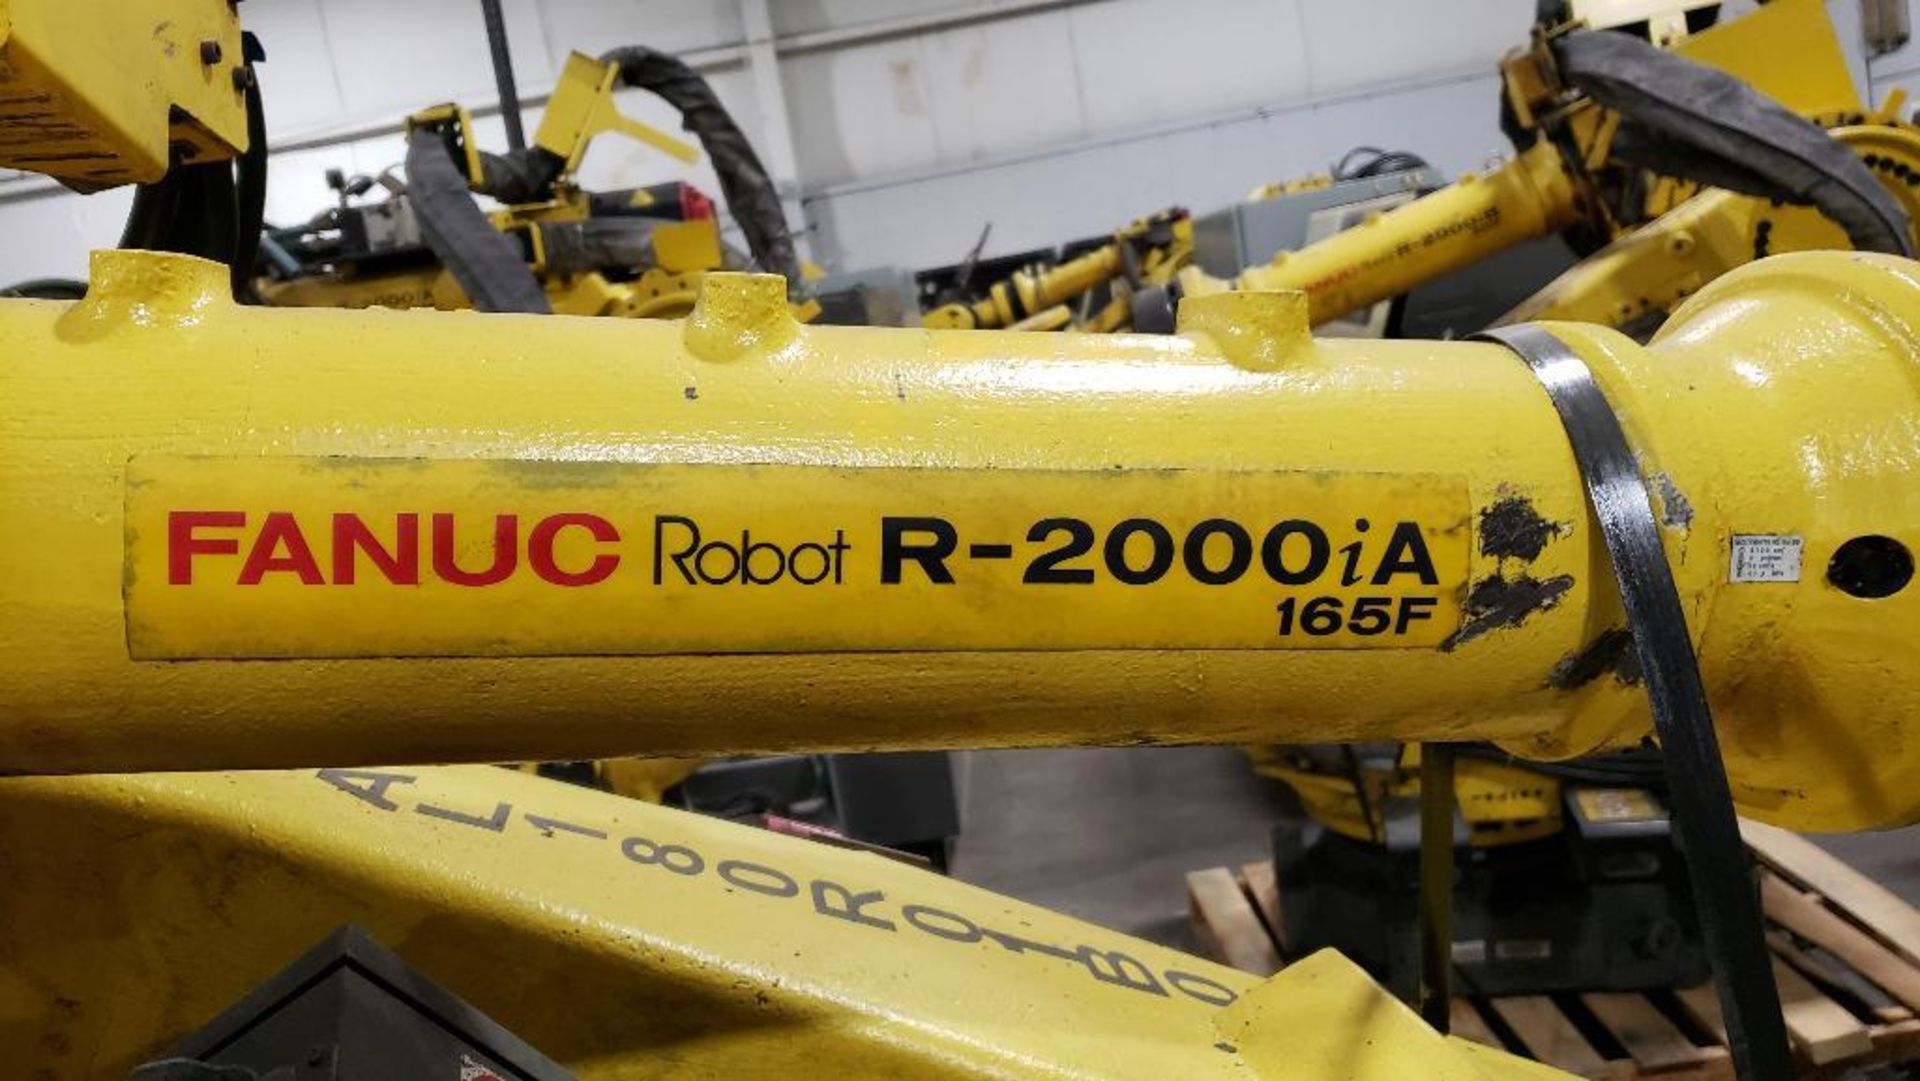 Fanuc R-2000iA/165F robot 6-axis arm. - Image 2 of 6